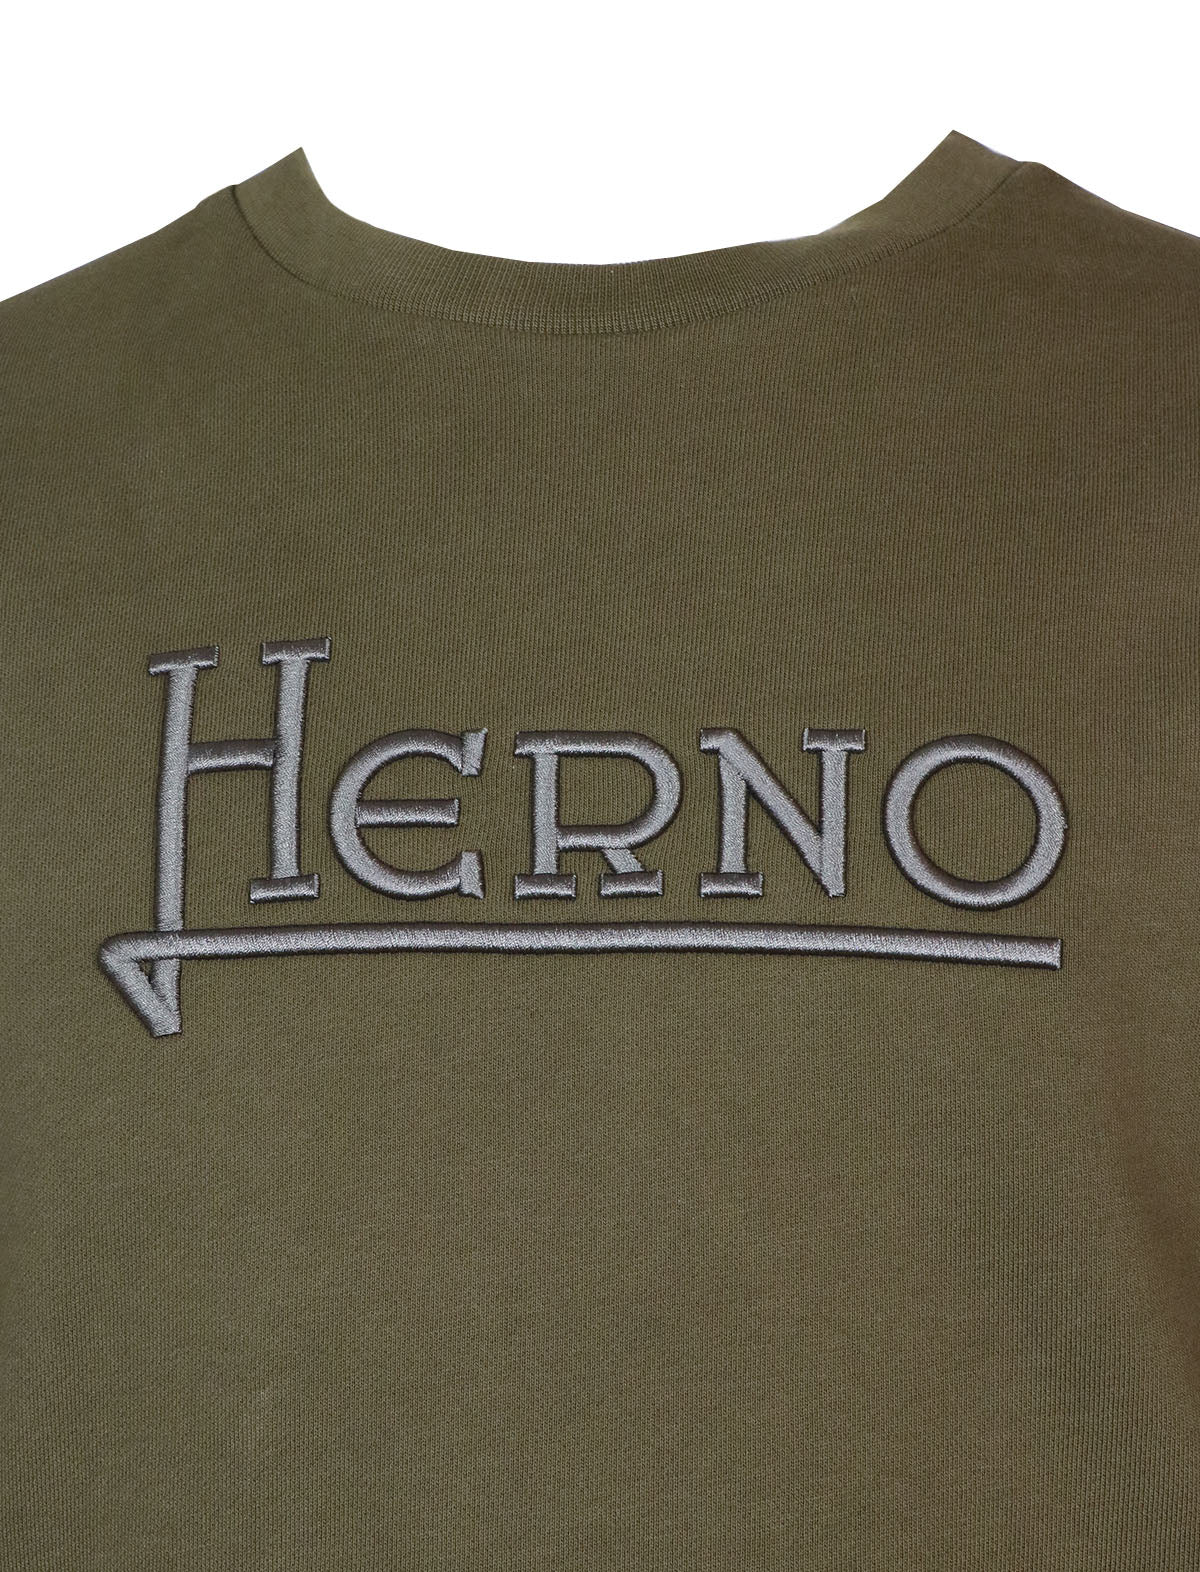 HERNO Cotton Sweater in Military Green